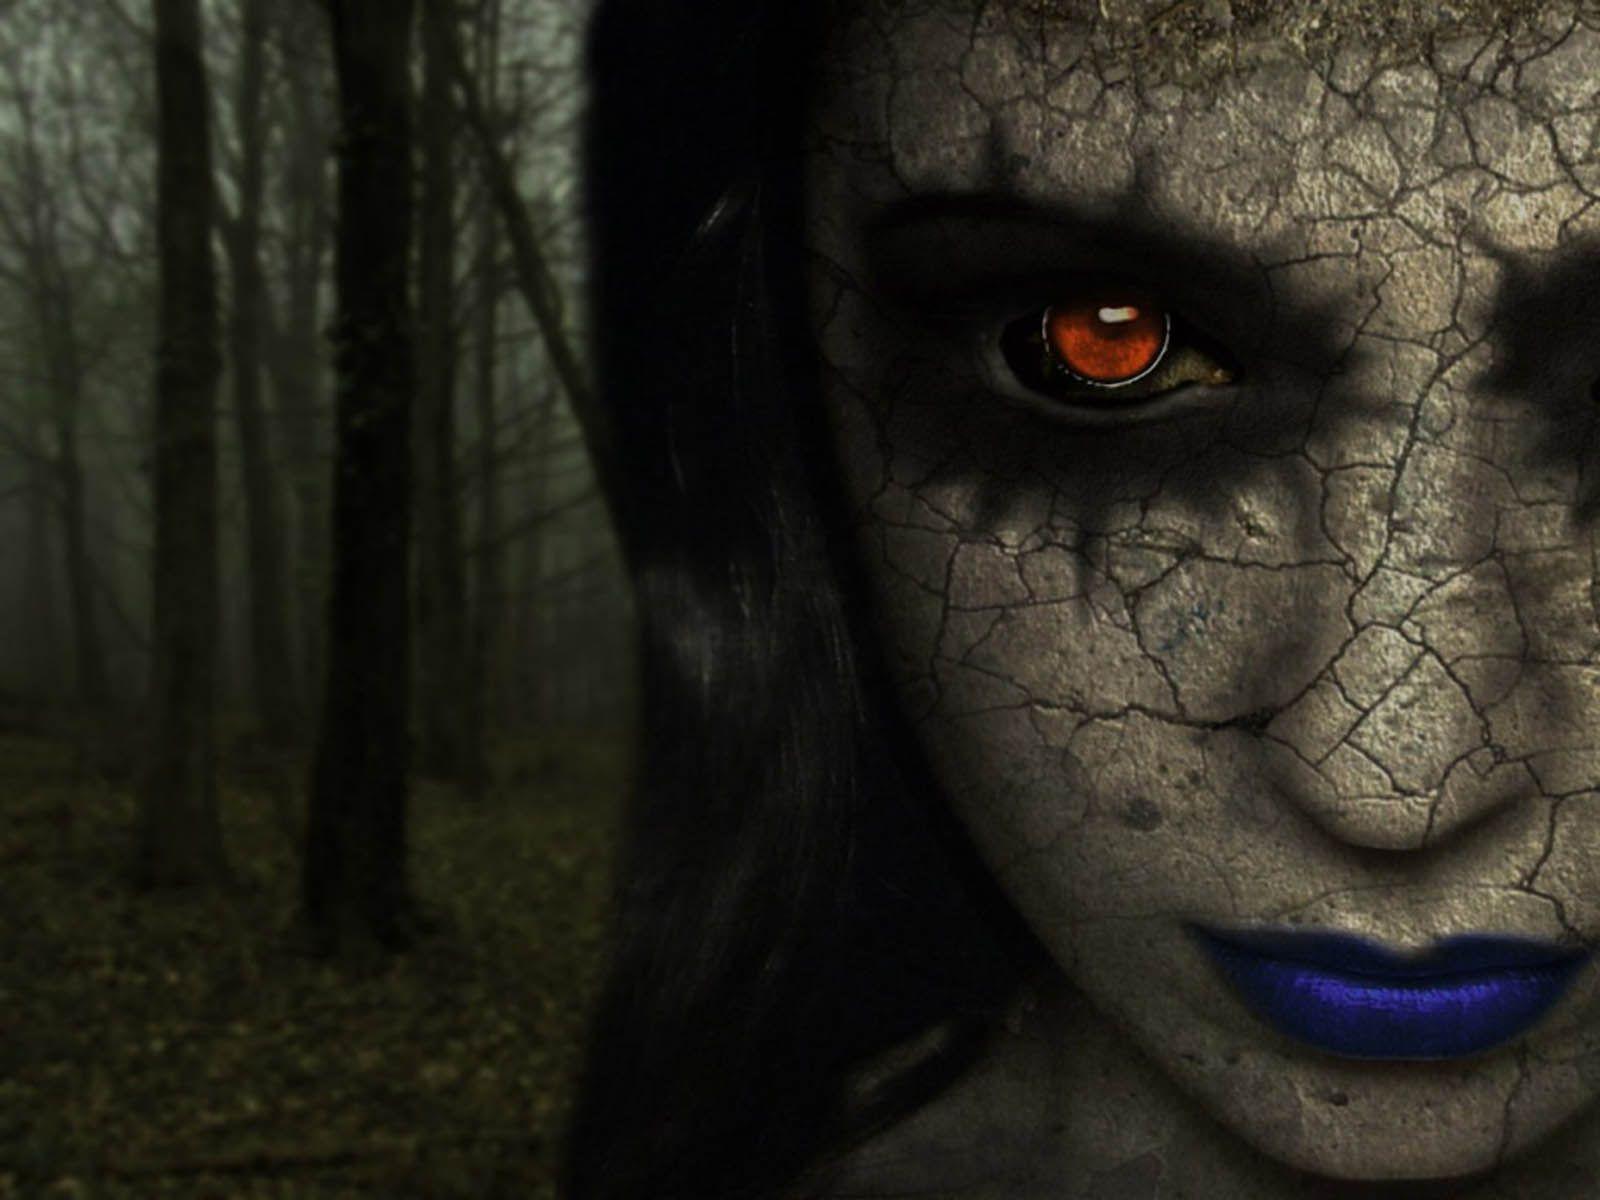 Dark woman w blue lips. Dragons, Fantasy and More